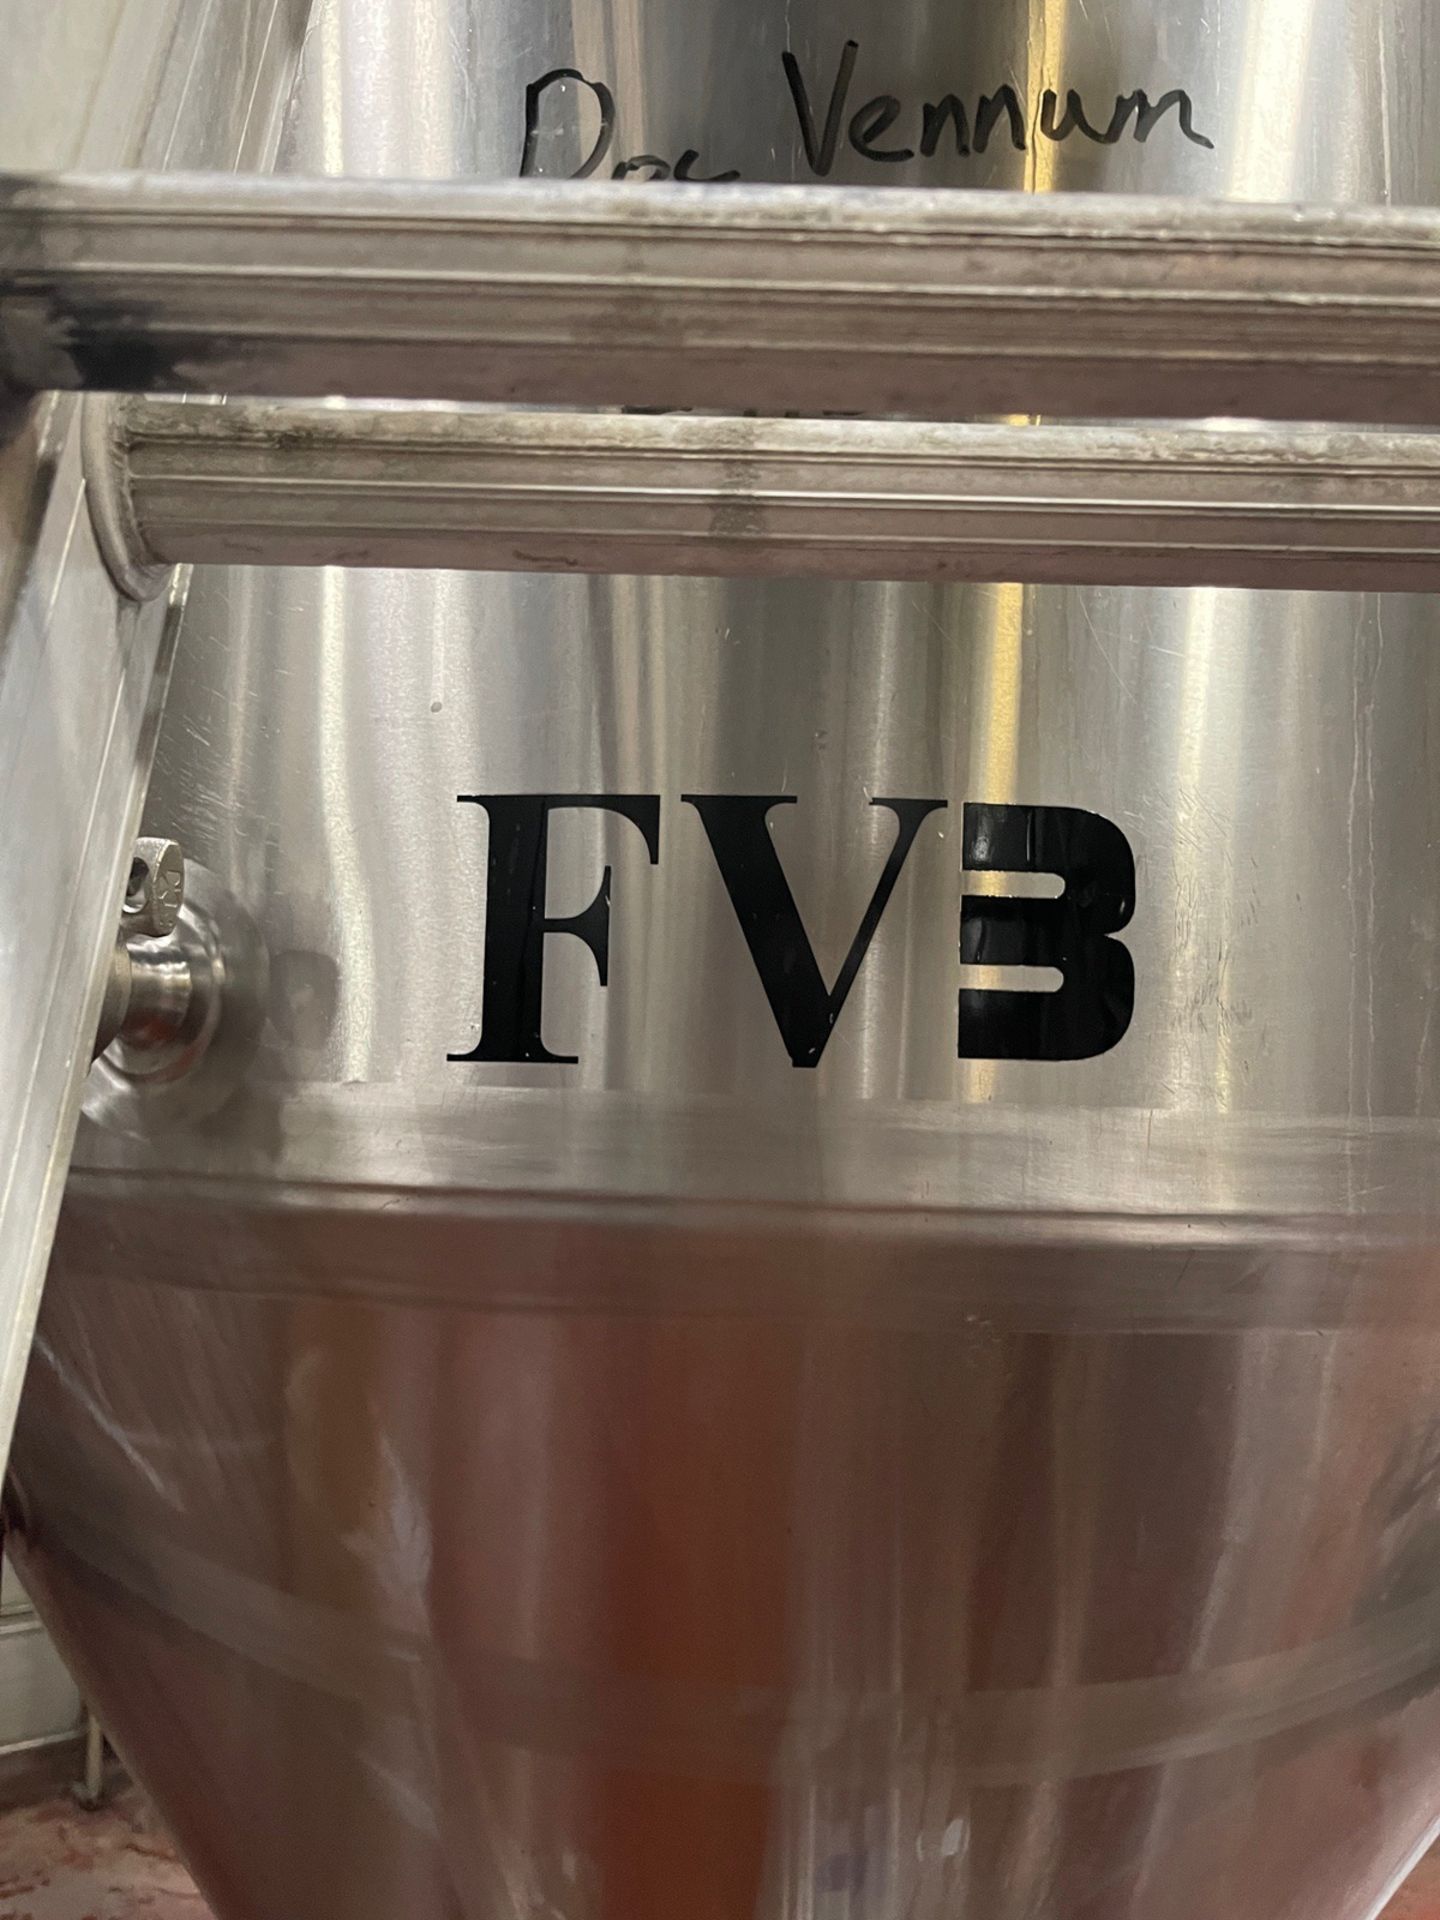 Sprinkman 500 Gal Stainless Steel Fermenter, Glycol Jacketed, Cone Bottom, Atmosphe | Rig Fee $1200 - Image 3 of 17